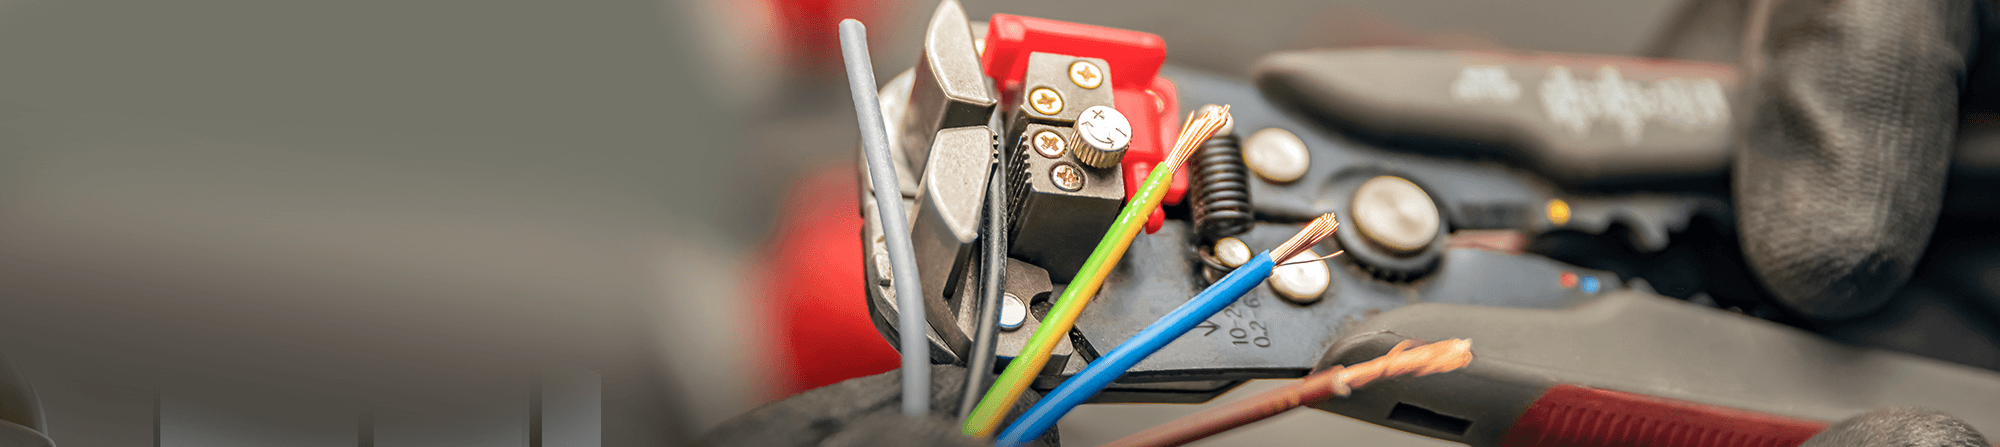 electrical repairs done right